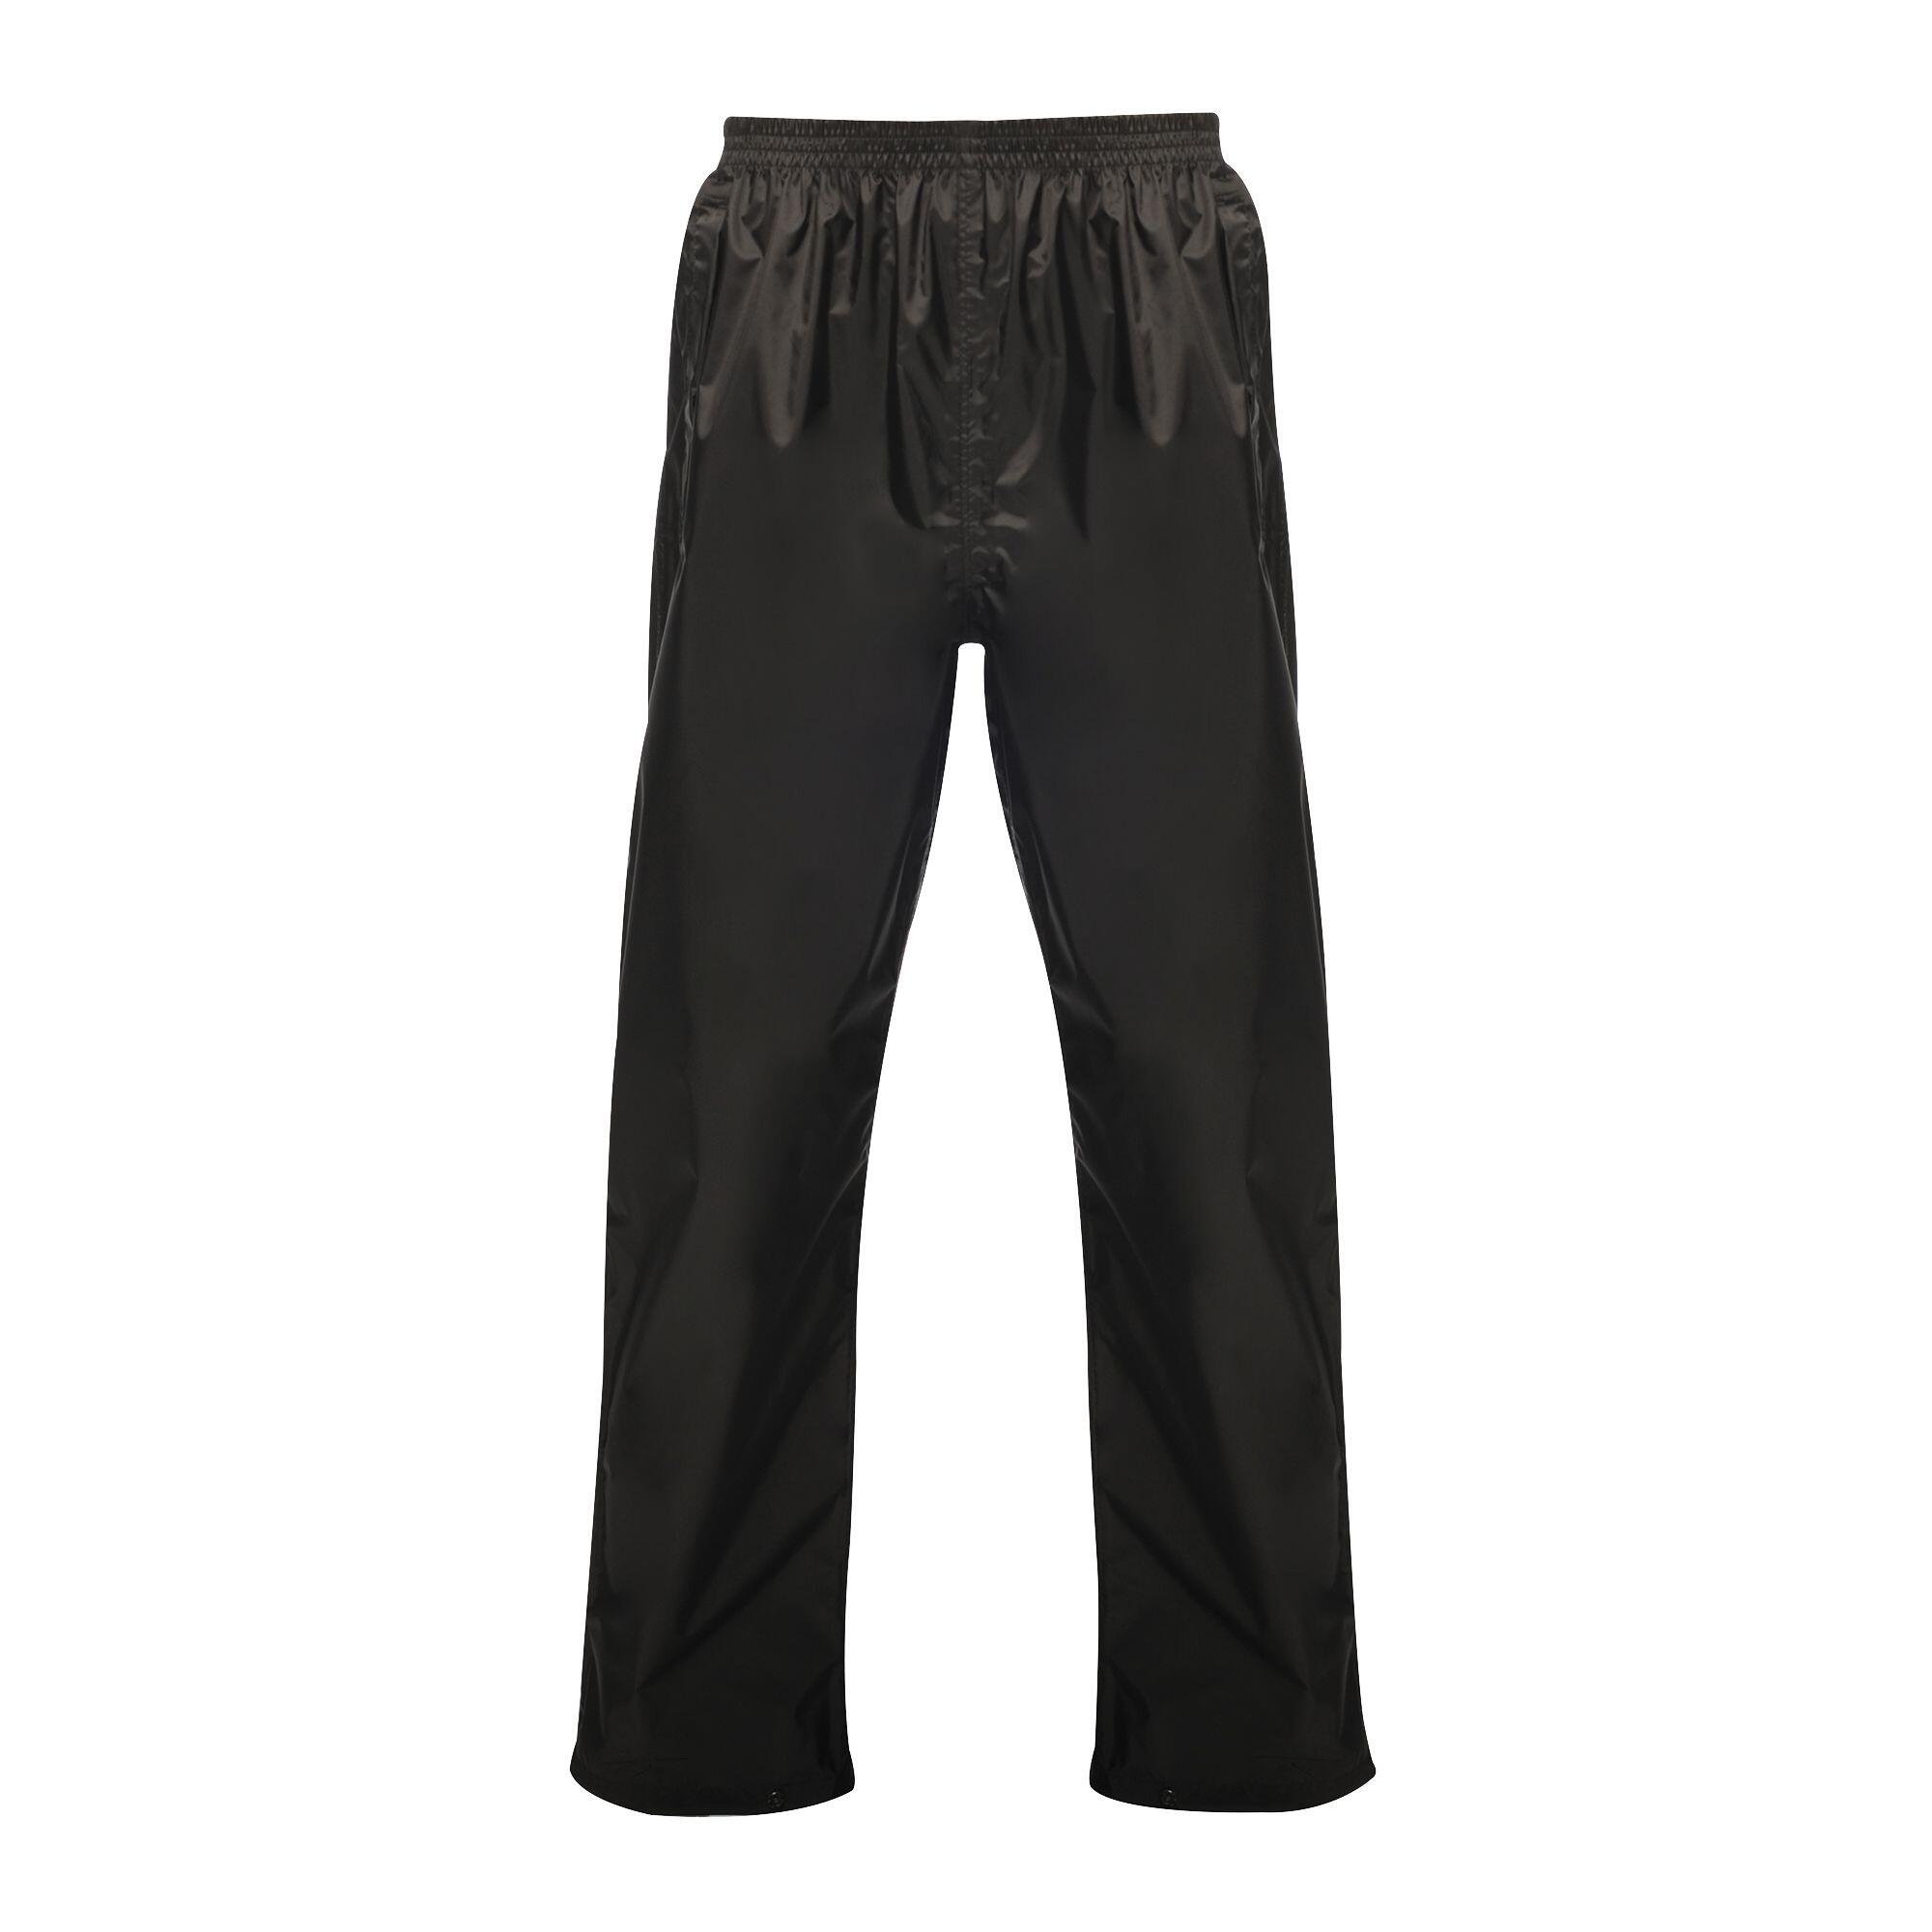 Mens Pro Packaway Overtrousers (Black) 1/4